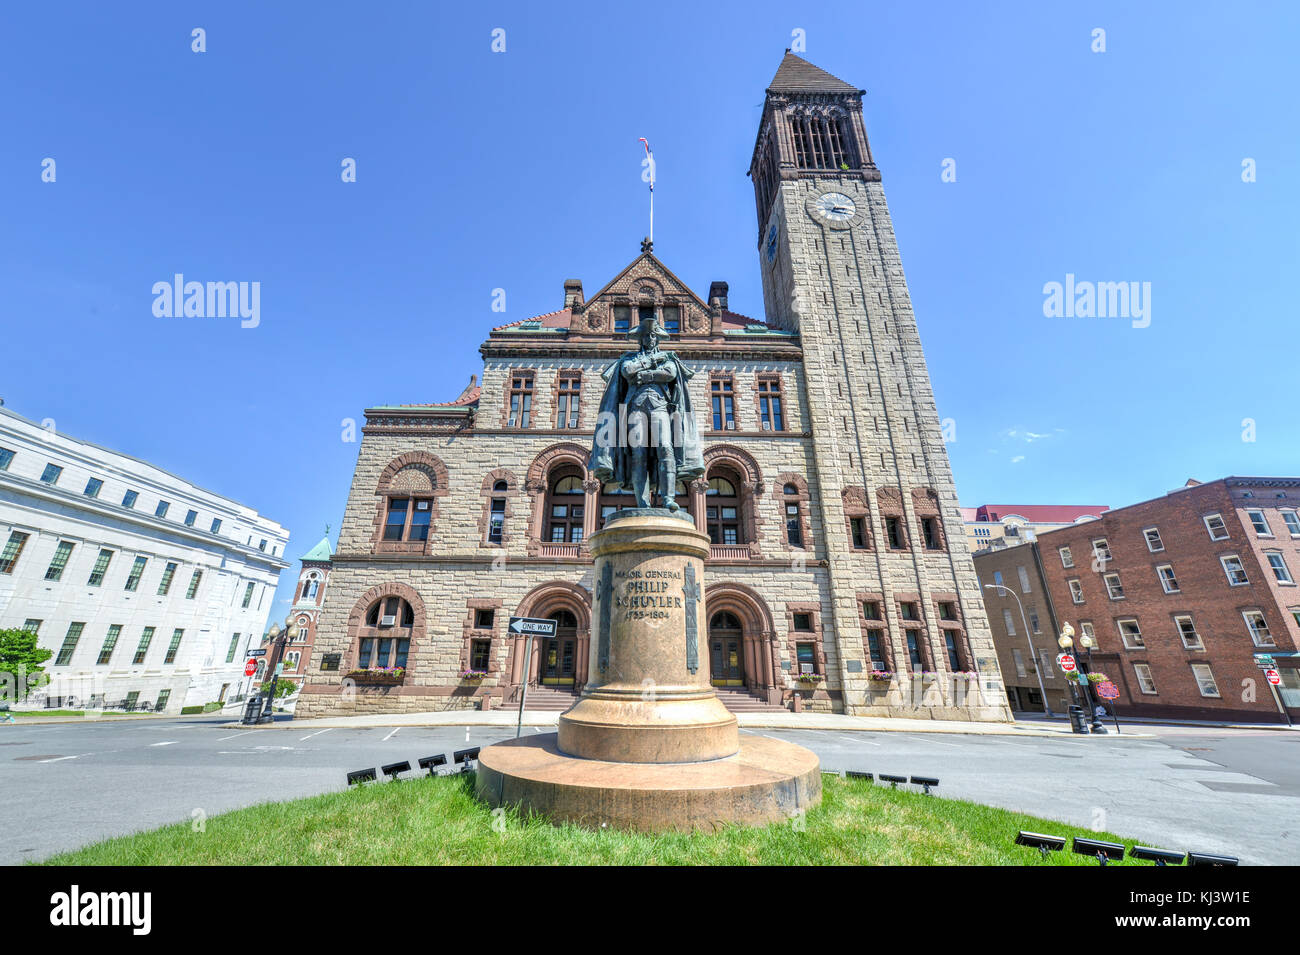 ALBANY, NEW YORK - JULY 6, 2014: Monument to Philip John Schuyler in front of the Albany City Hall. American Revolutionary officer who served in the F Stock Photo